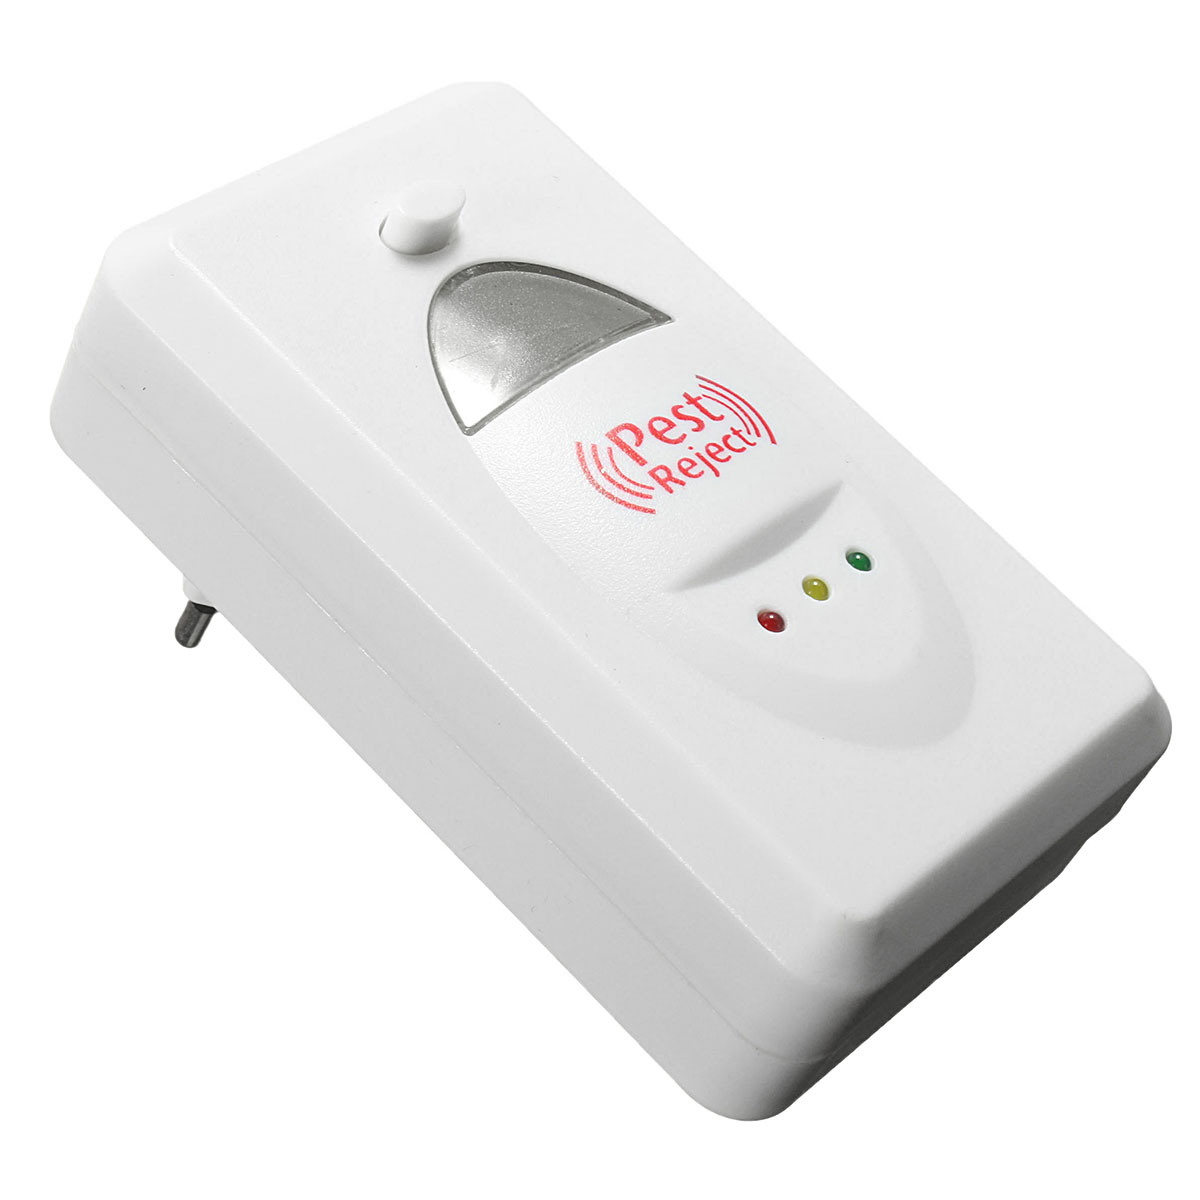 Ultrasonic-Electronic-Pest-Animal-Repeller-Reject-Anti-Mosquito-Bug-Insect-Enhanced-1397436-5